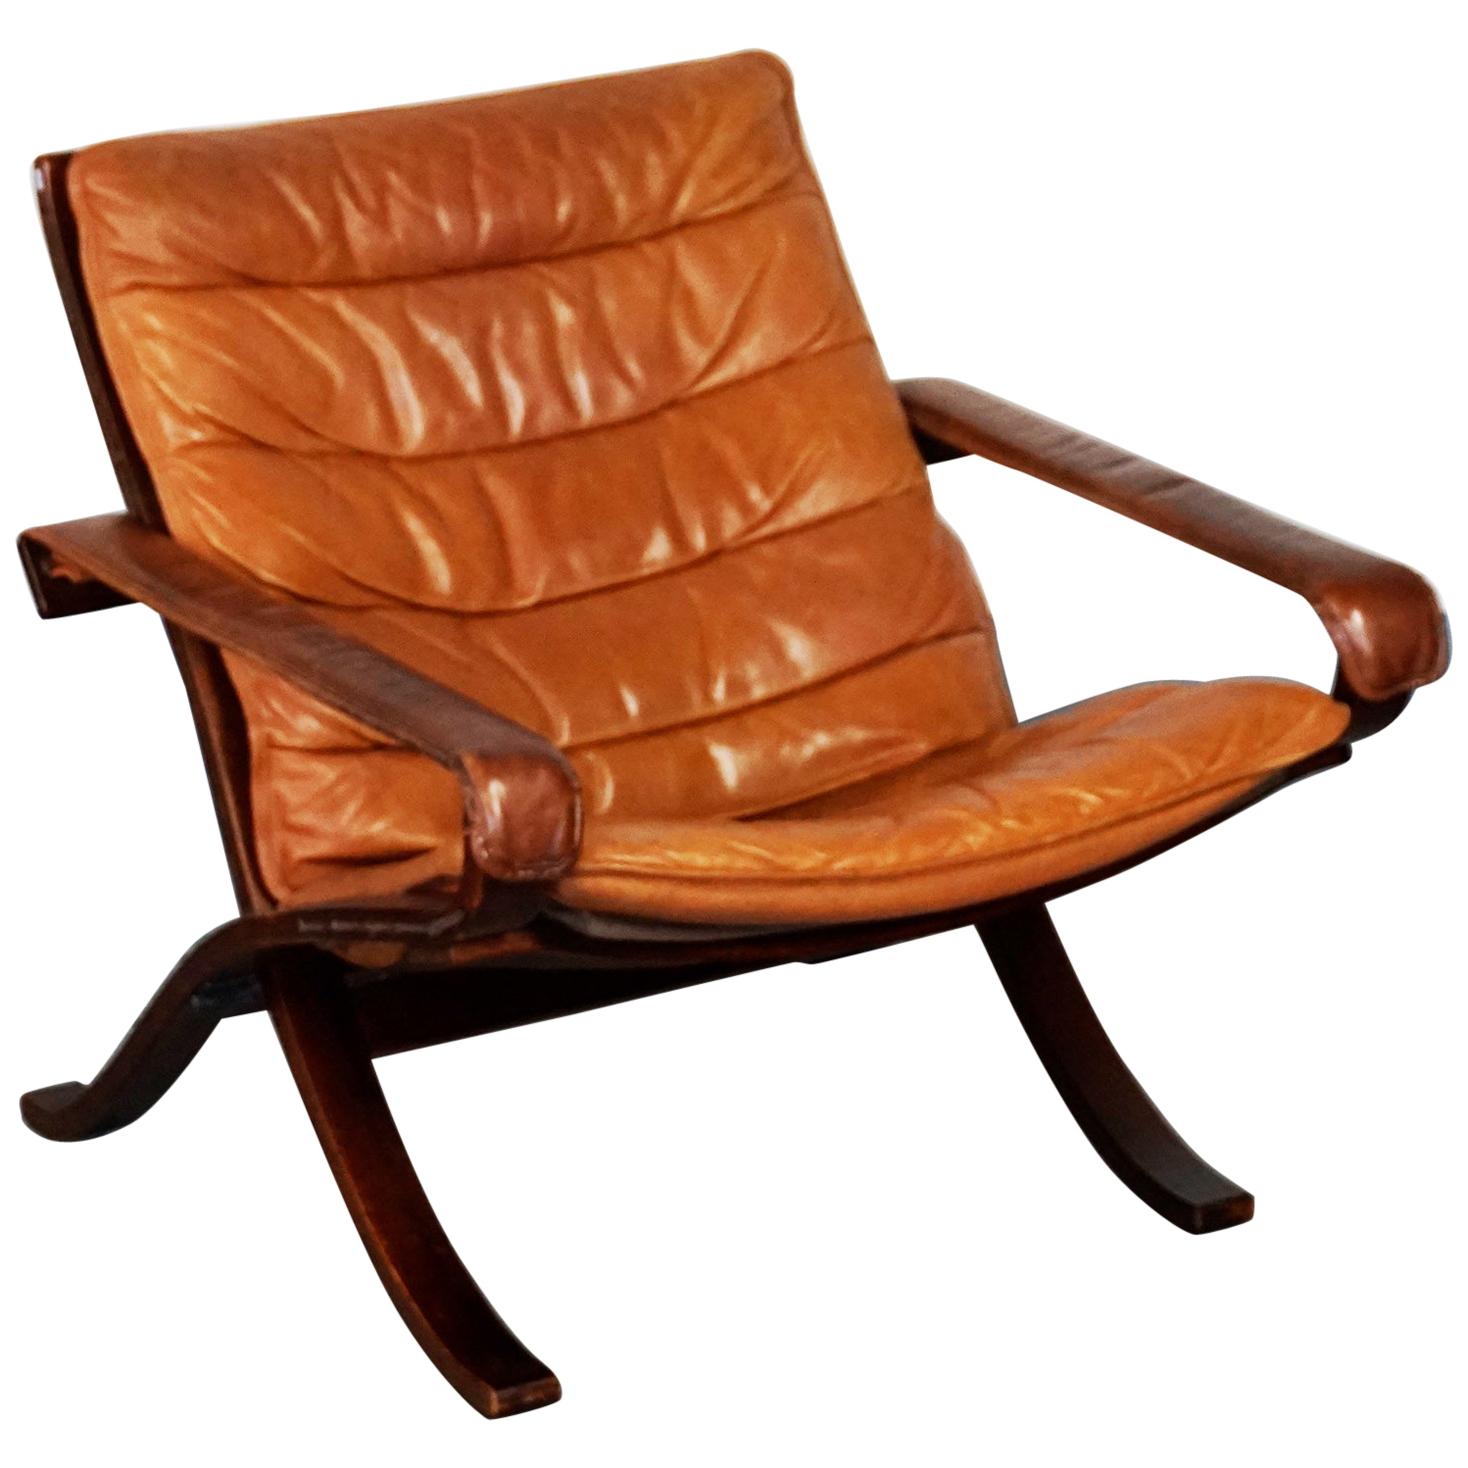 Scandinavian Lounge Chair Flex with Cognac Leather by I. Relling for Westnofa